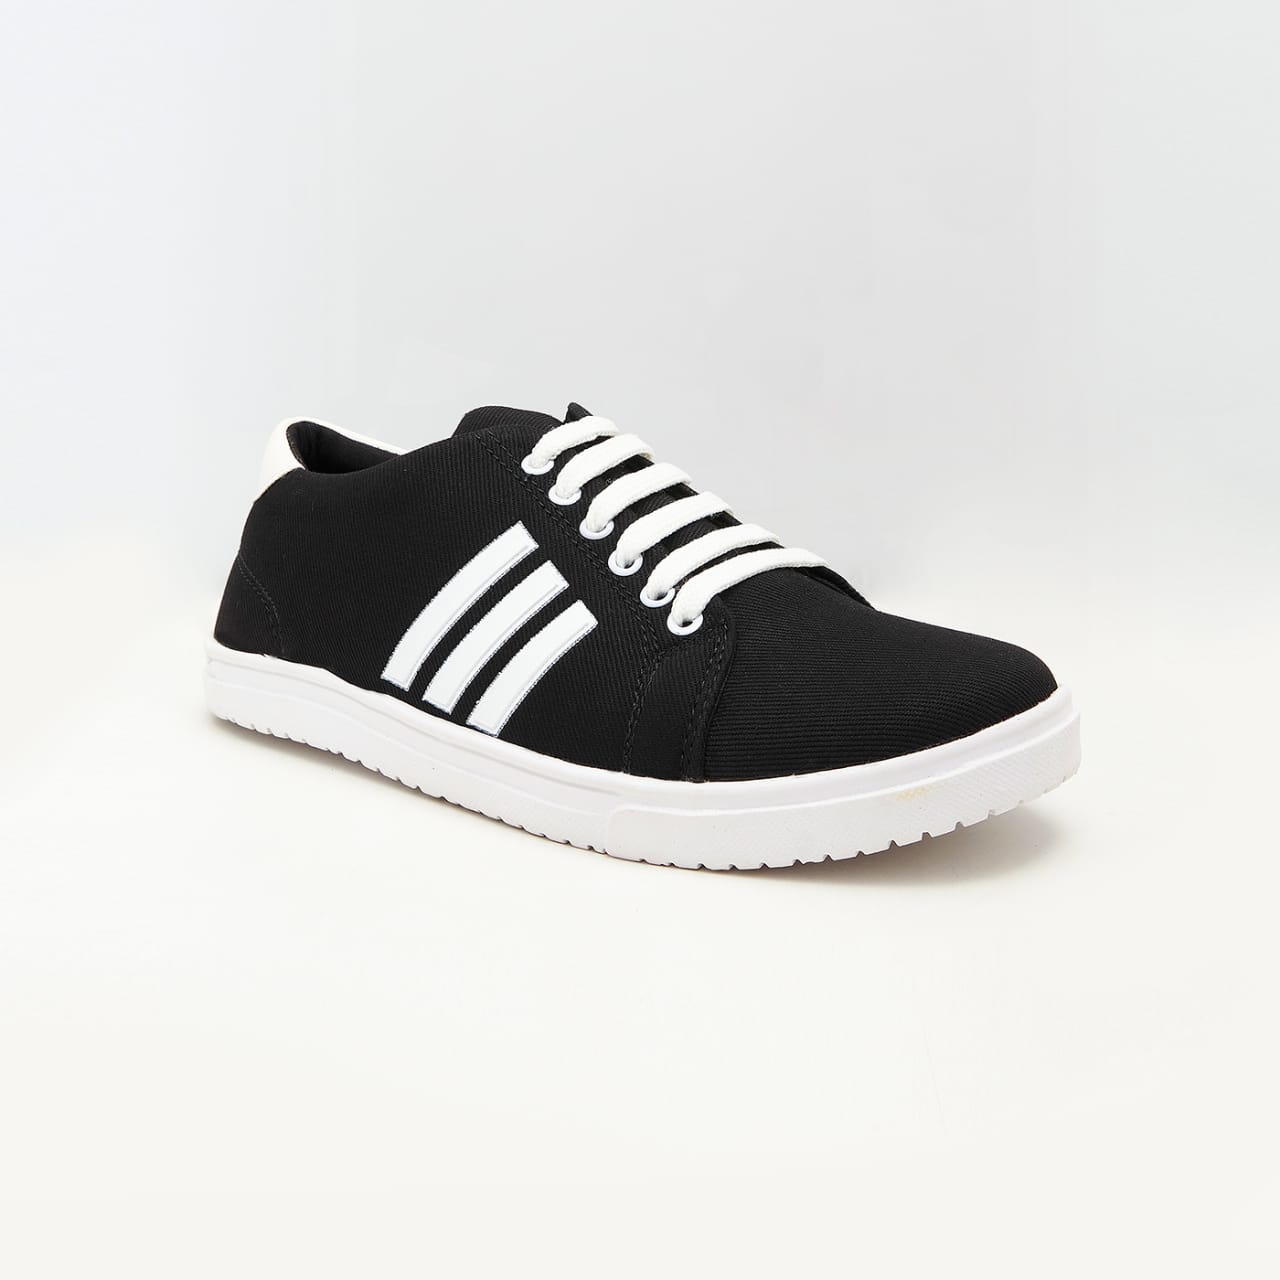 Mens Black Sneakers Shoes with White Lines 001